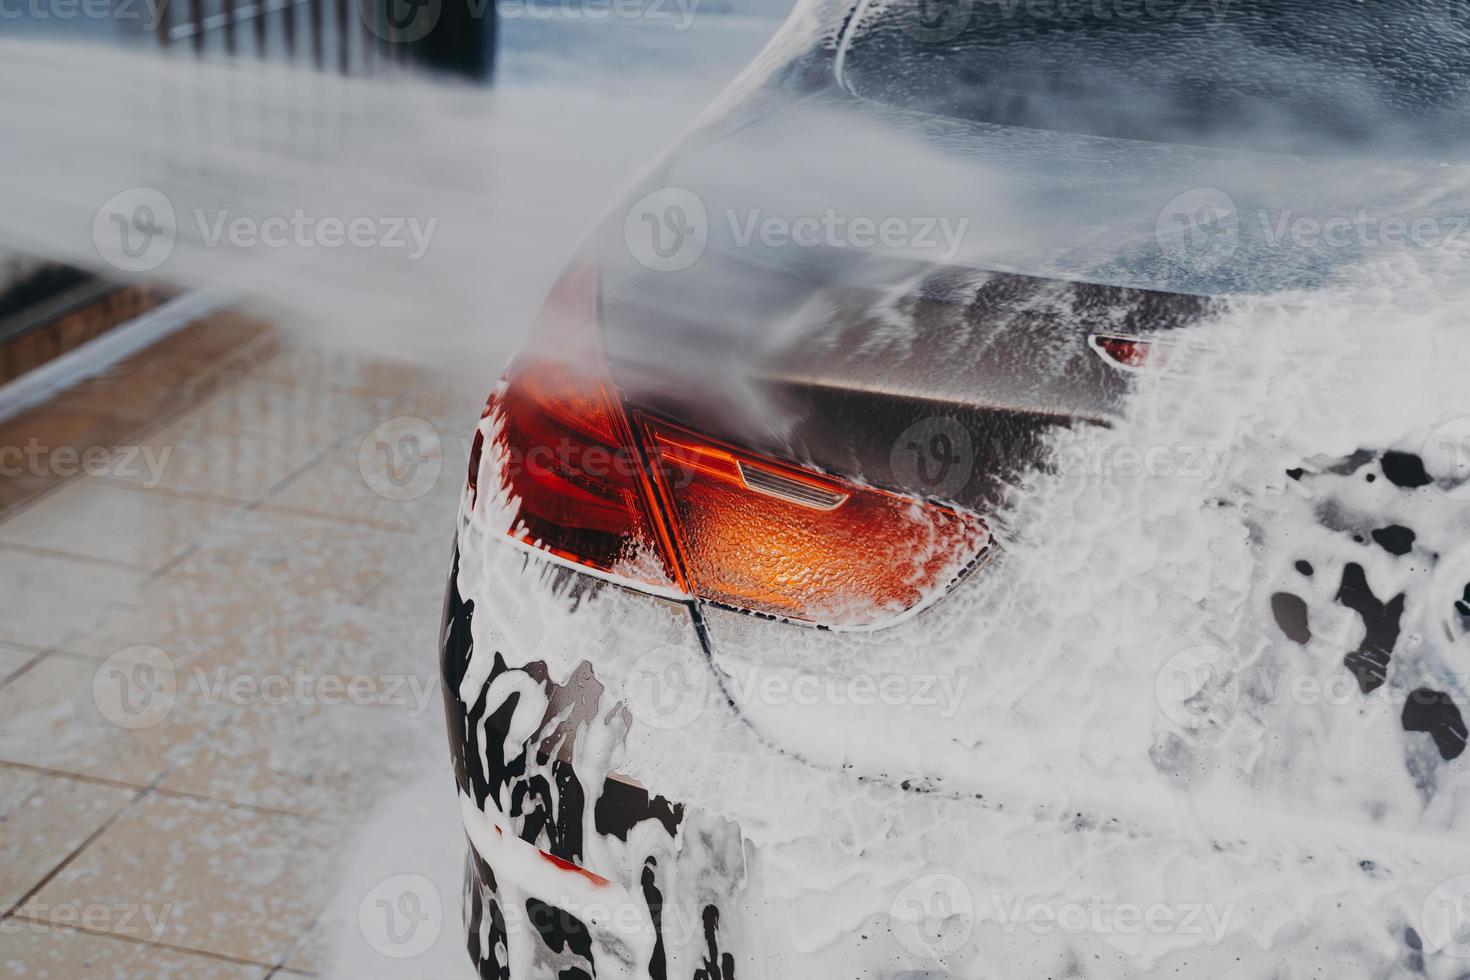 Washing car exterior surface with high pressure washer at self-serve cleaning station outdoors photo